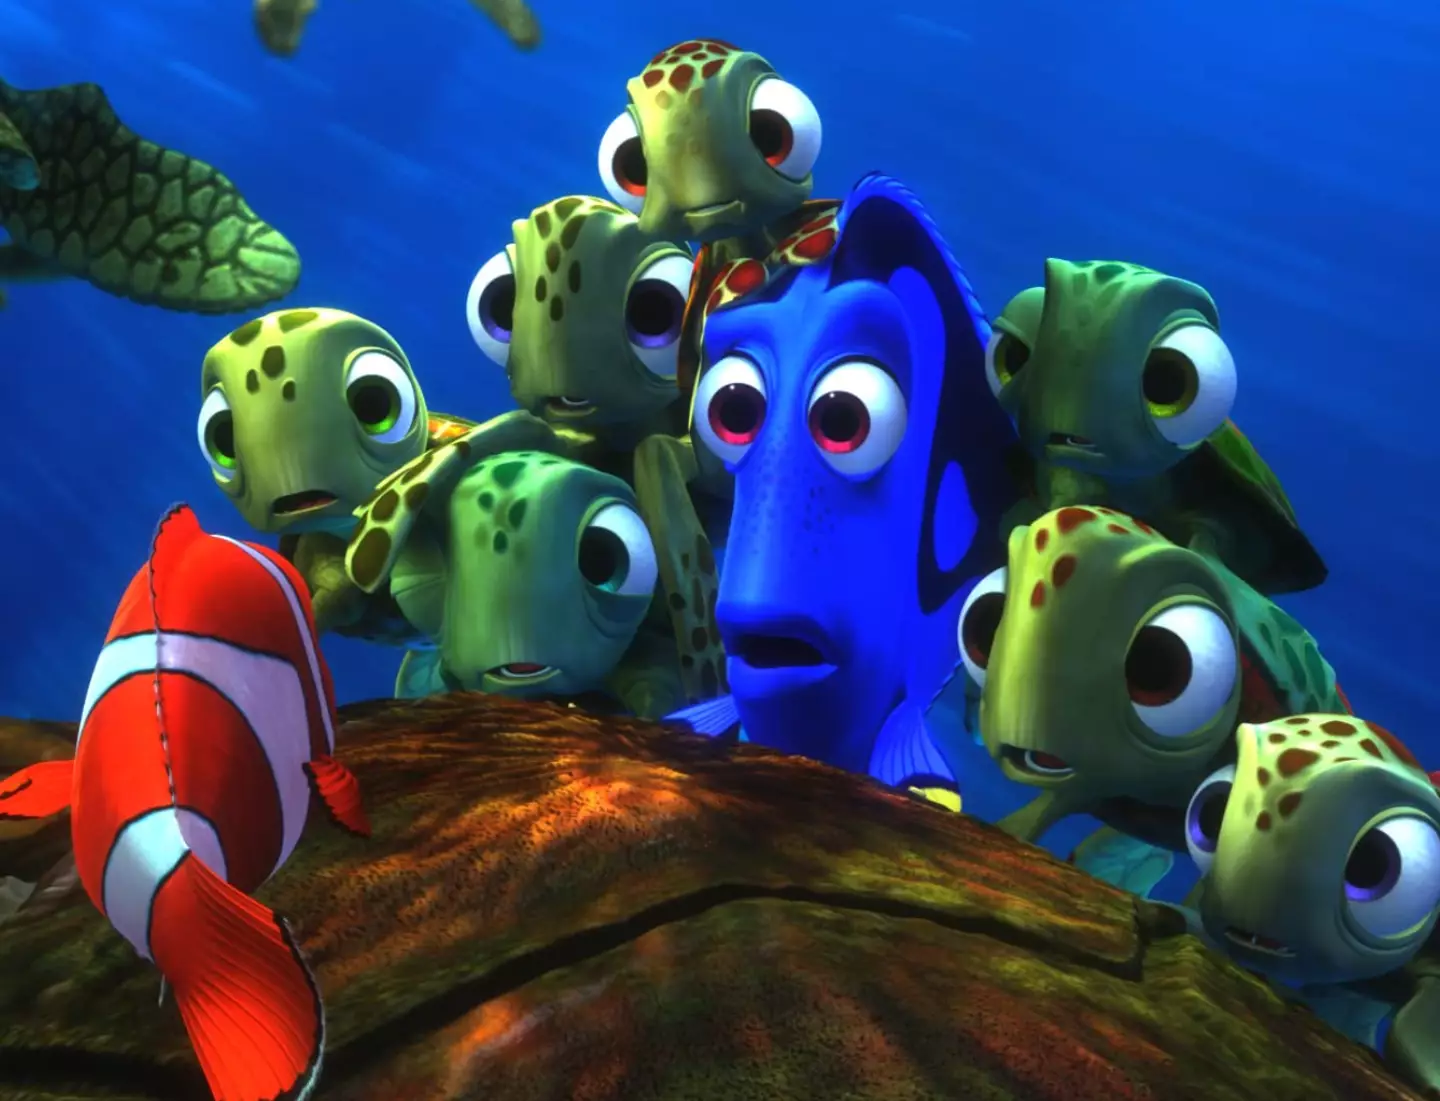 Your face when you realise how old Finding Nemo is.